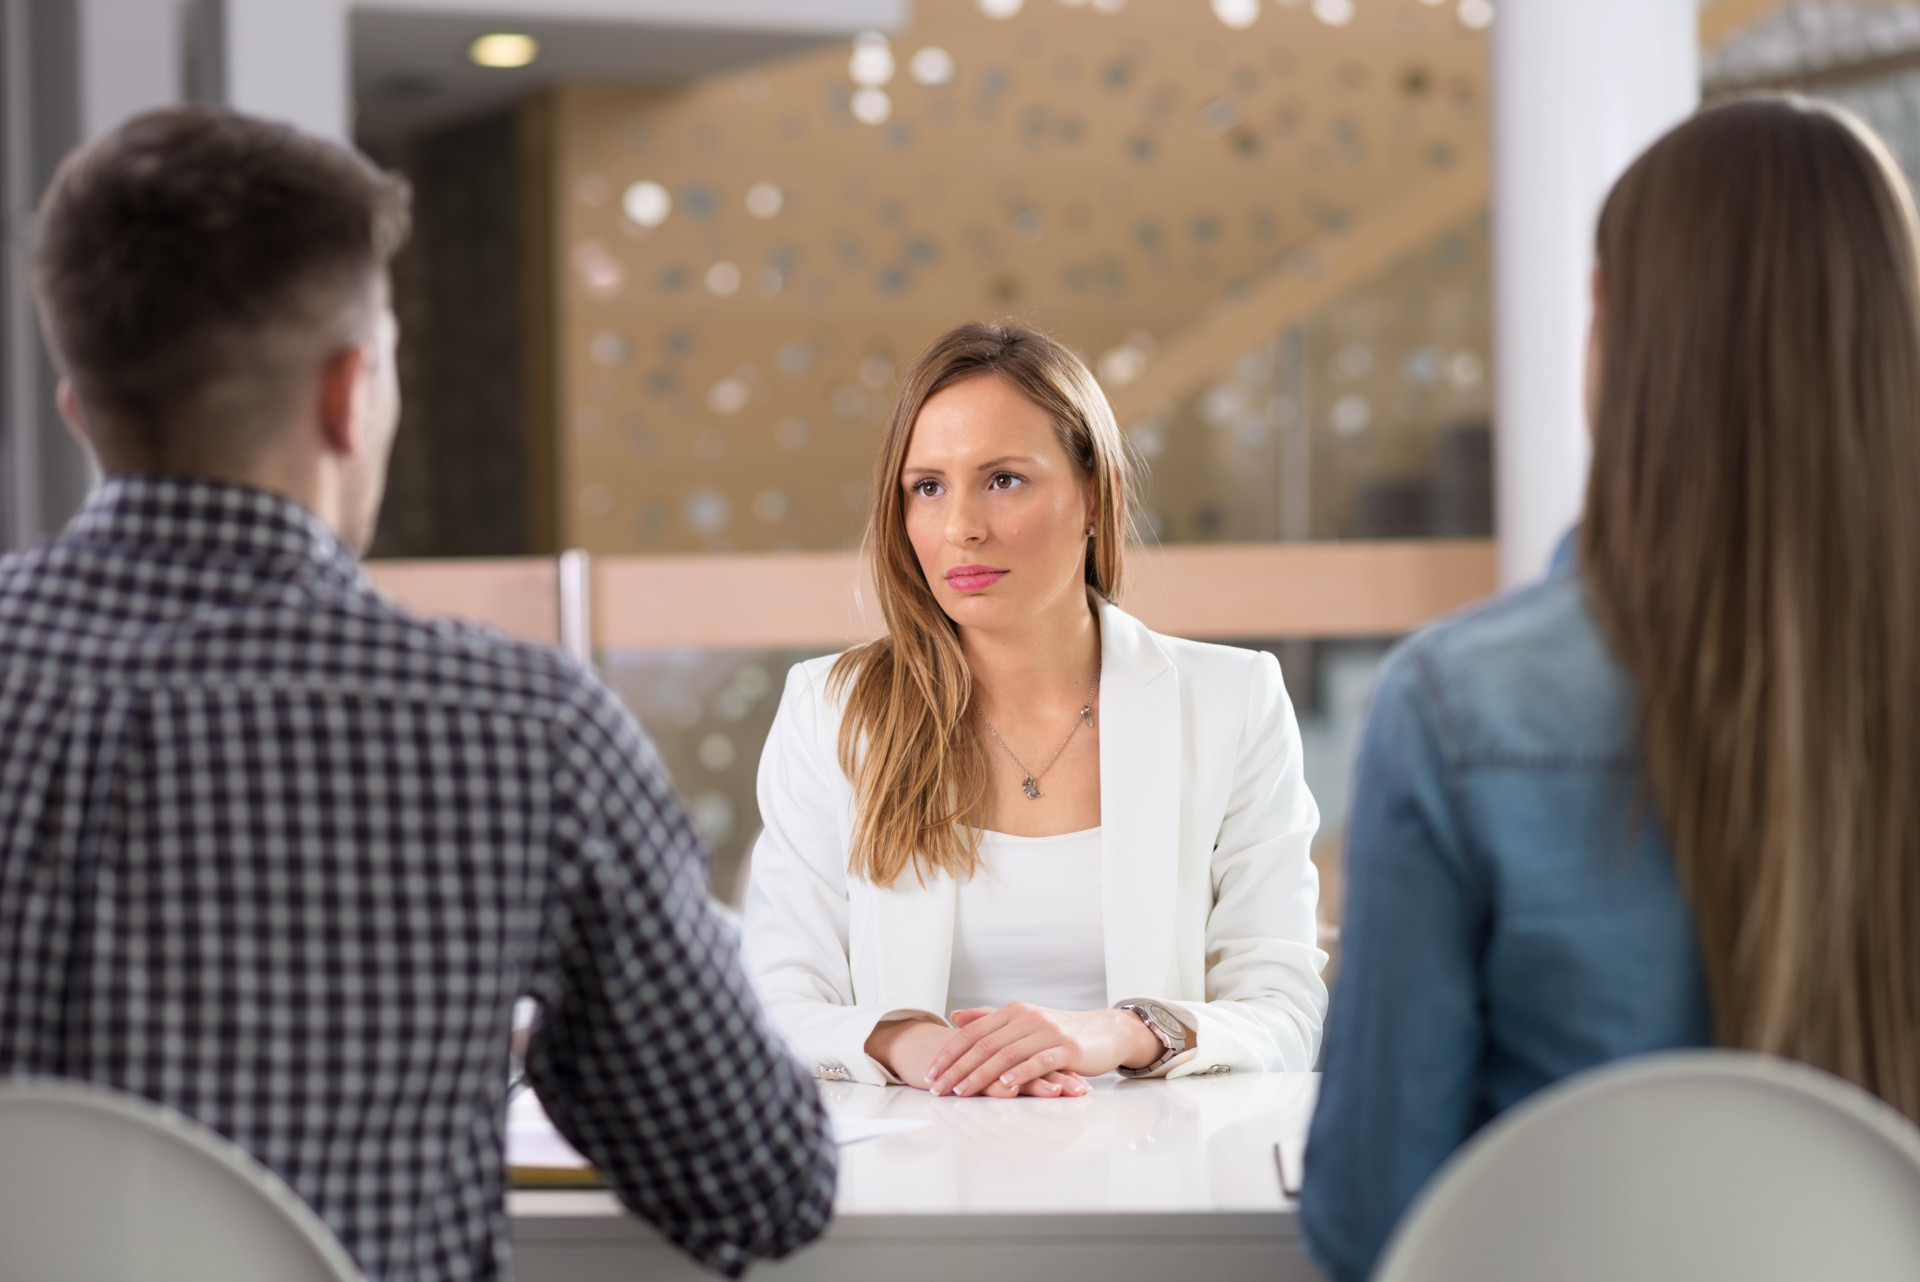 Wait for your turn to speak and don't keep interrupting the interviewer when they are asking you something, or weighing up your answer. Don't use slang or overly casual language in the interview.<p><a href="https://www.msn.com/en-us/community/channel/vid-7xx8mnucu55yw63we9va2gwr7uihbxwc68fxqp25x6tg4ftibpra?cvid=94631541bc0f4f89bfd59158d696ad7e">Follow us and access great exclusive content every day</a></p>